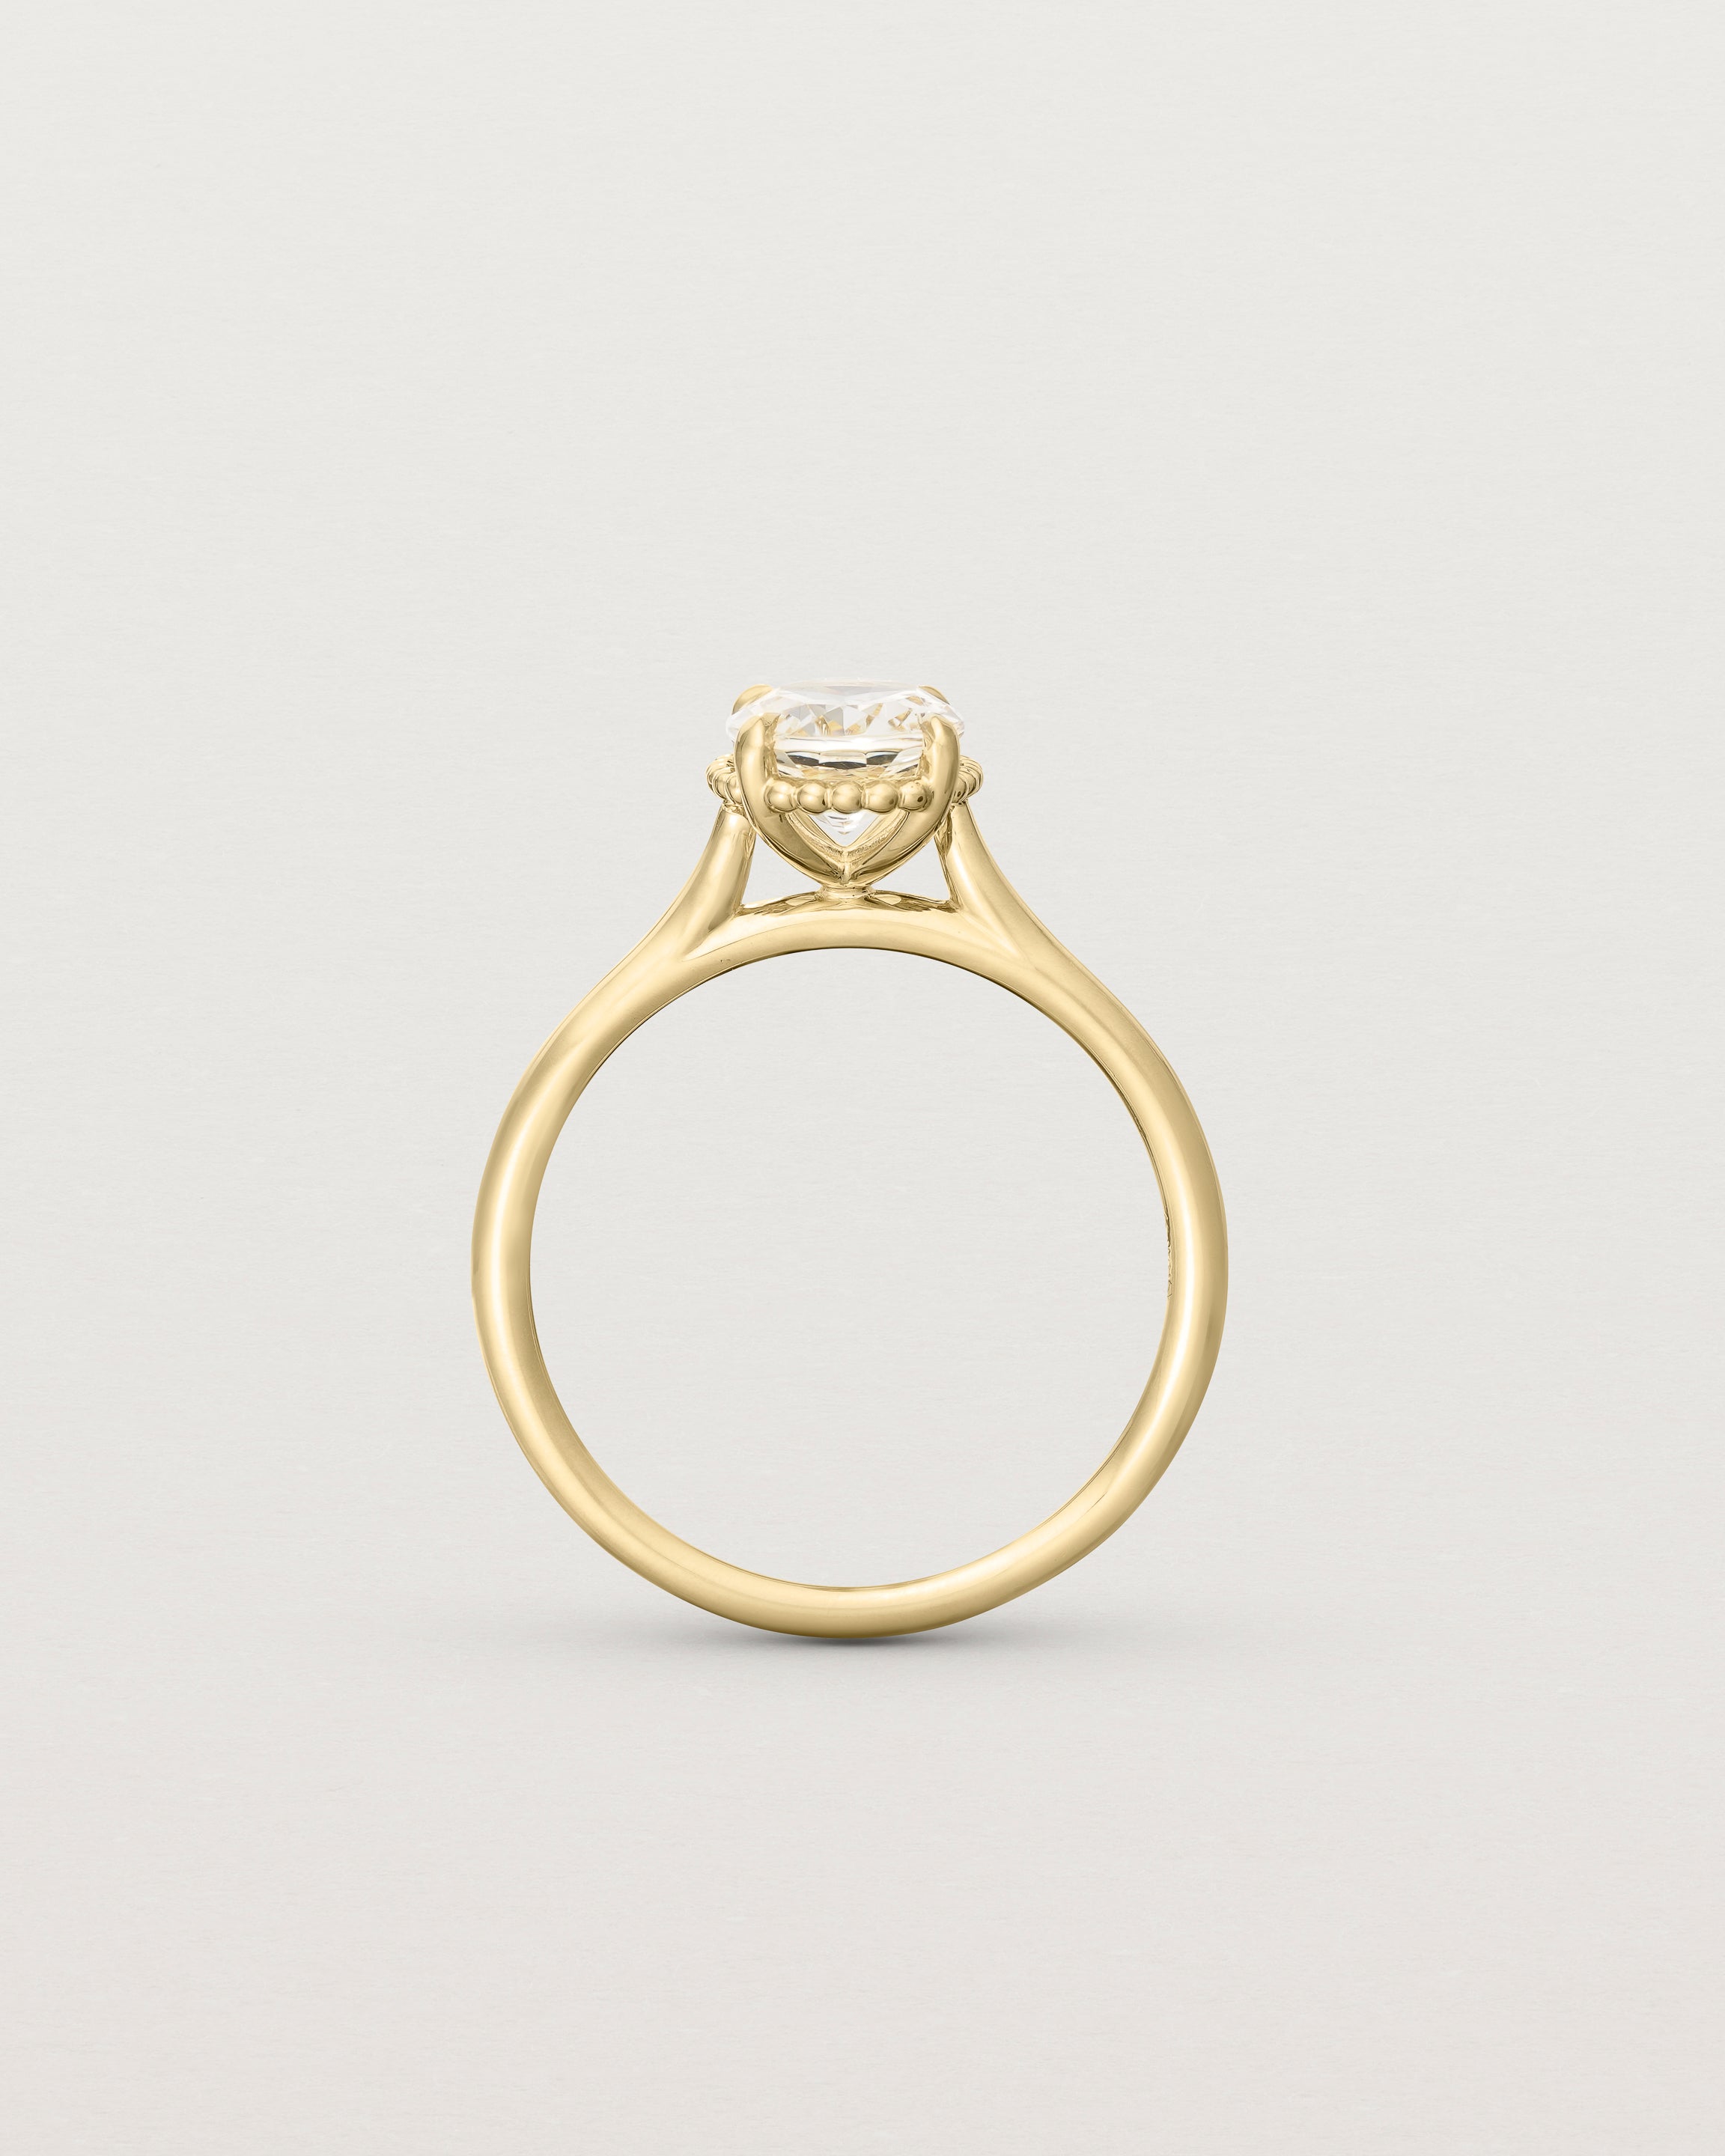 Standing view of the Thea Oval Solitaire | Savannah Sunstone in yellow gold.